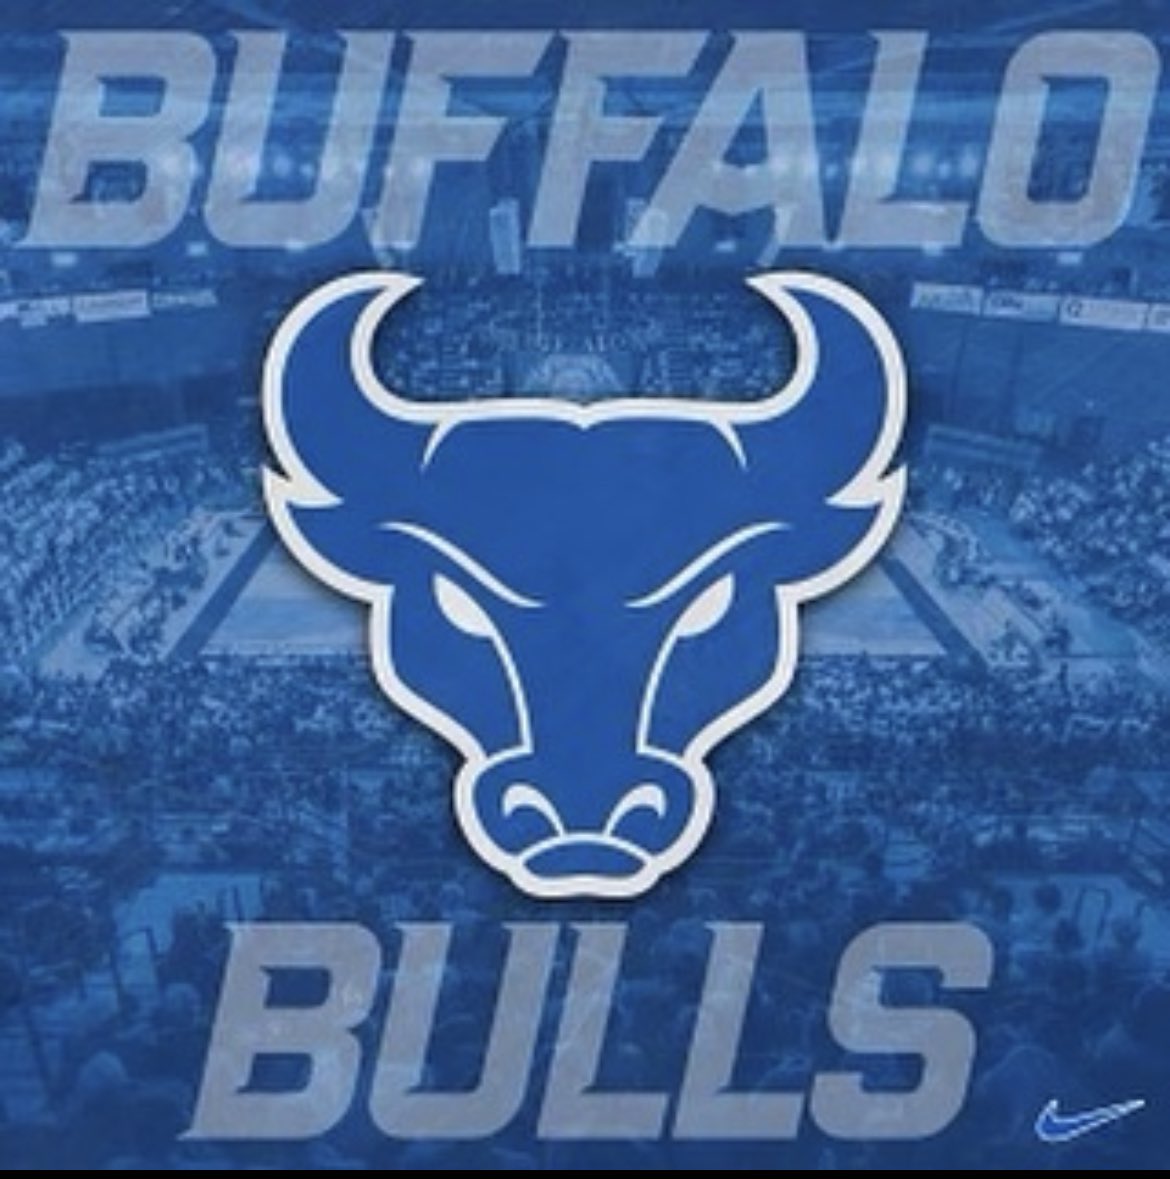 After great conversations with Coach Tibbs and Coach G, I am excited to say I’ve received an offer to play at the University at Buffalo!!! All glory to God! Thanks again to the UB staff!        @coachGH3           @UBmenshoops       @CAA_Bball_Ok          @CoachJohnRoby